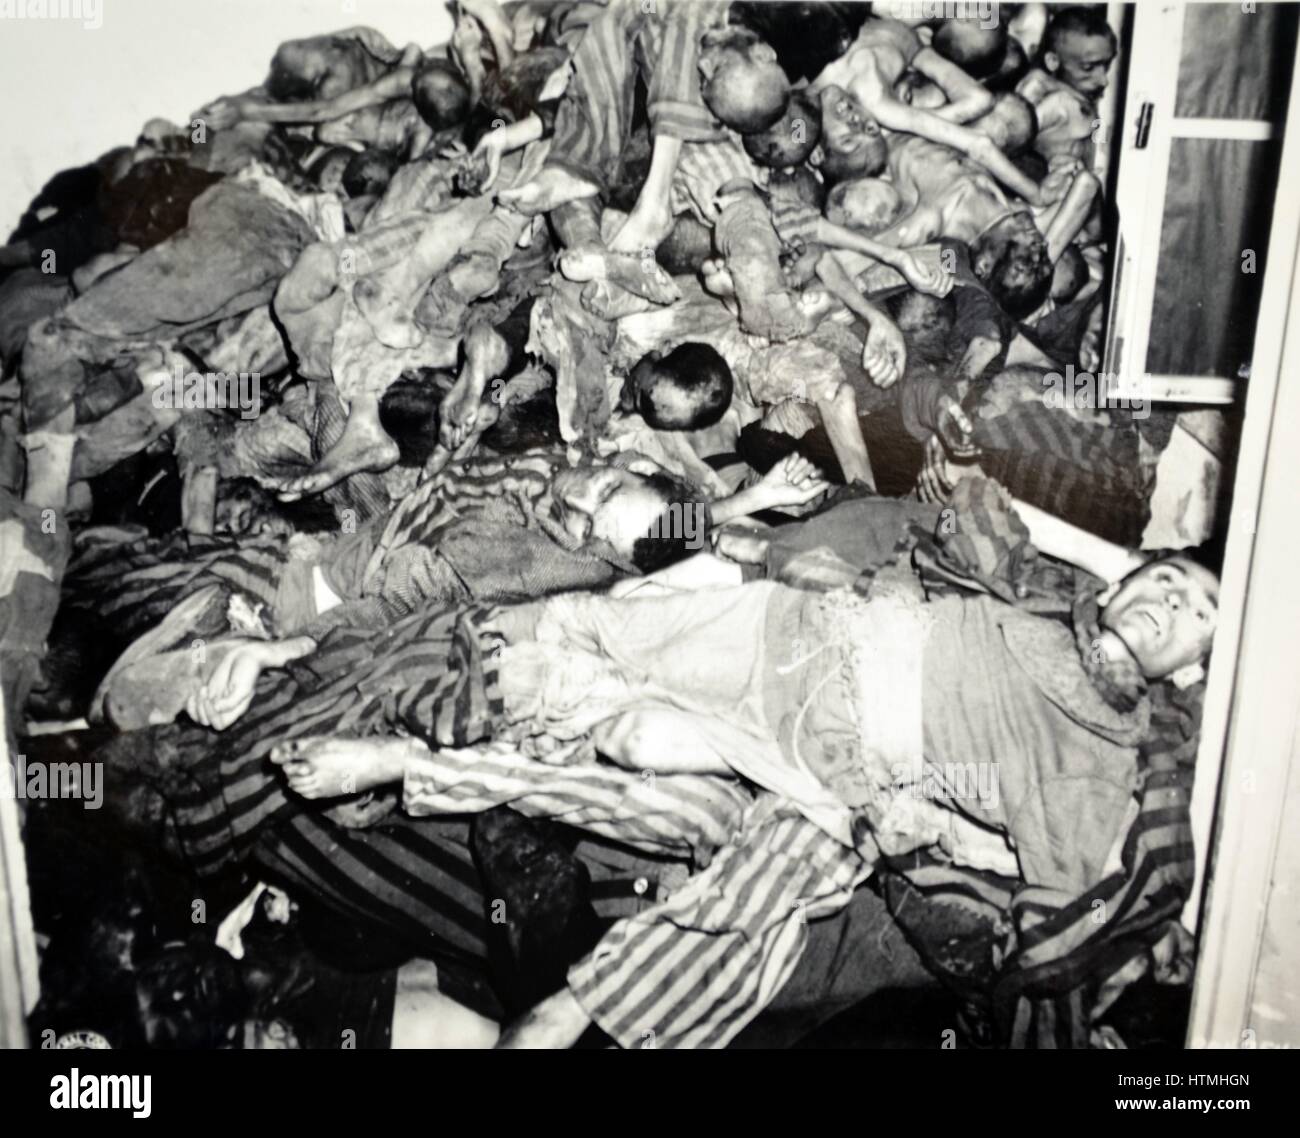 Bodies of Jews killed at Dachau concentration camp, the first of the Nazi concentration camps opened in Germany, intended to hold political prisoners. It is located on the grounds of an abandoned munitions factory near the medieval town of Dachau, about 1 Stock Photo